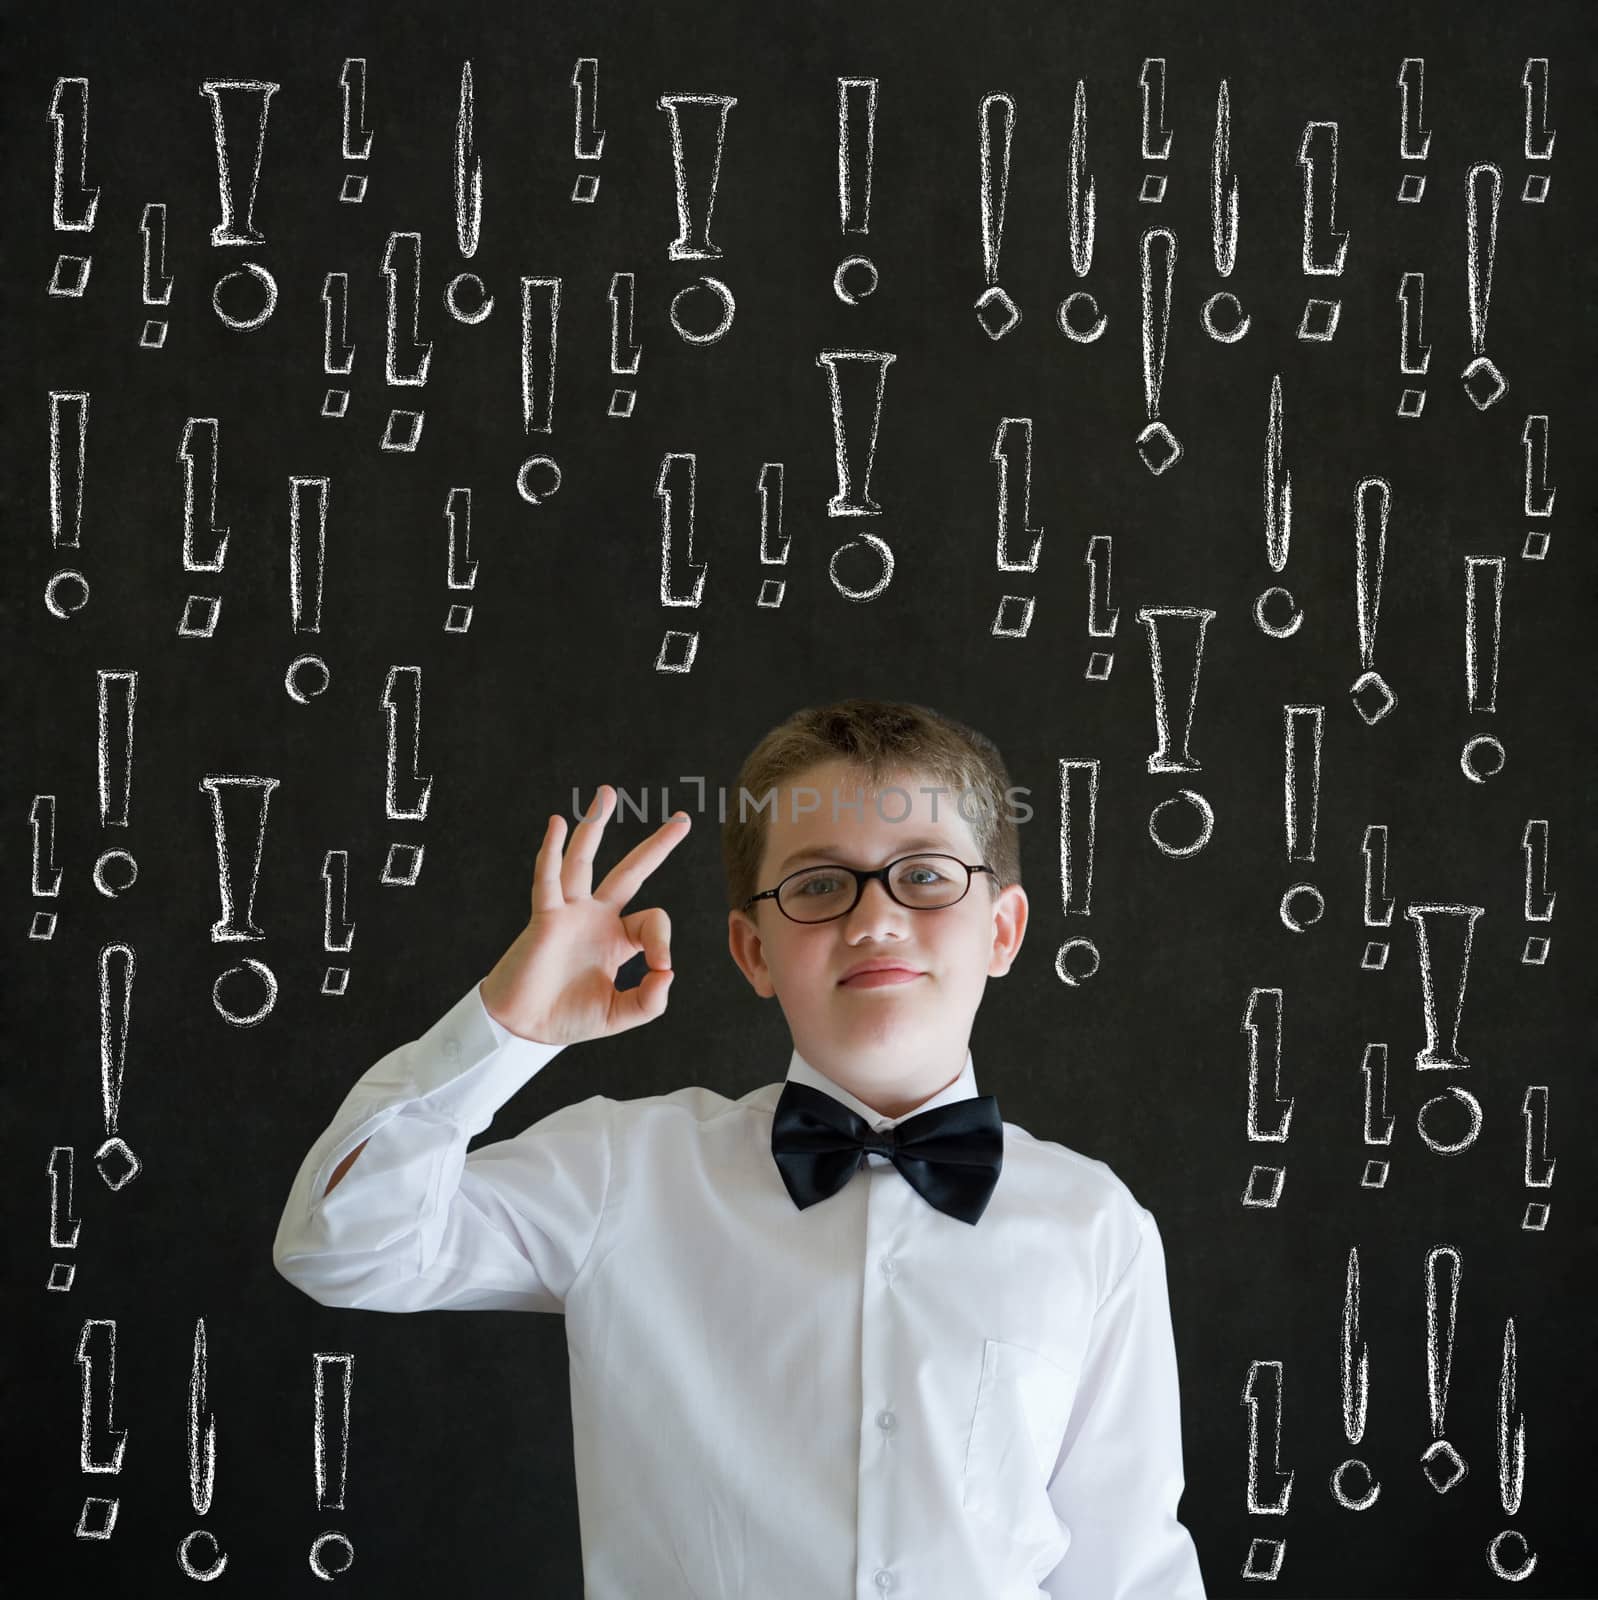 All ok or okay sign boy dressed up as business man with chalk exclamation marks on blackboard background